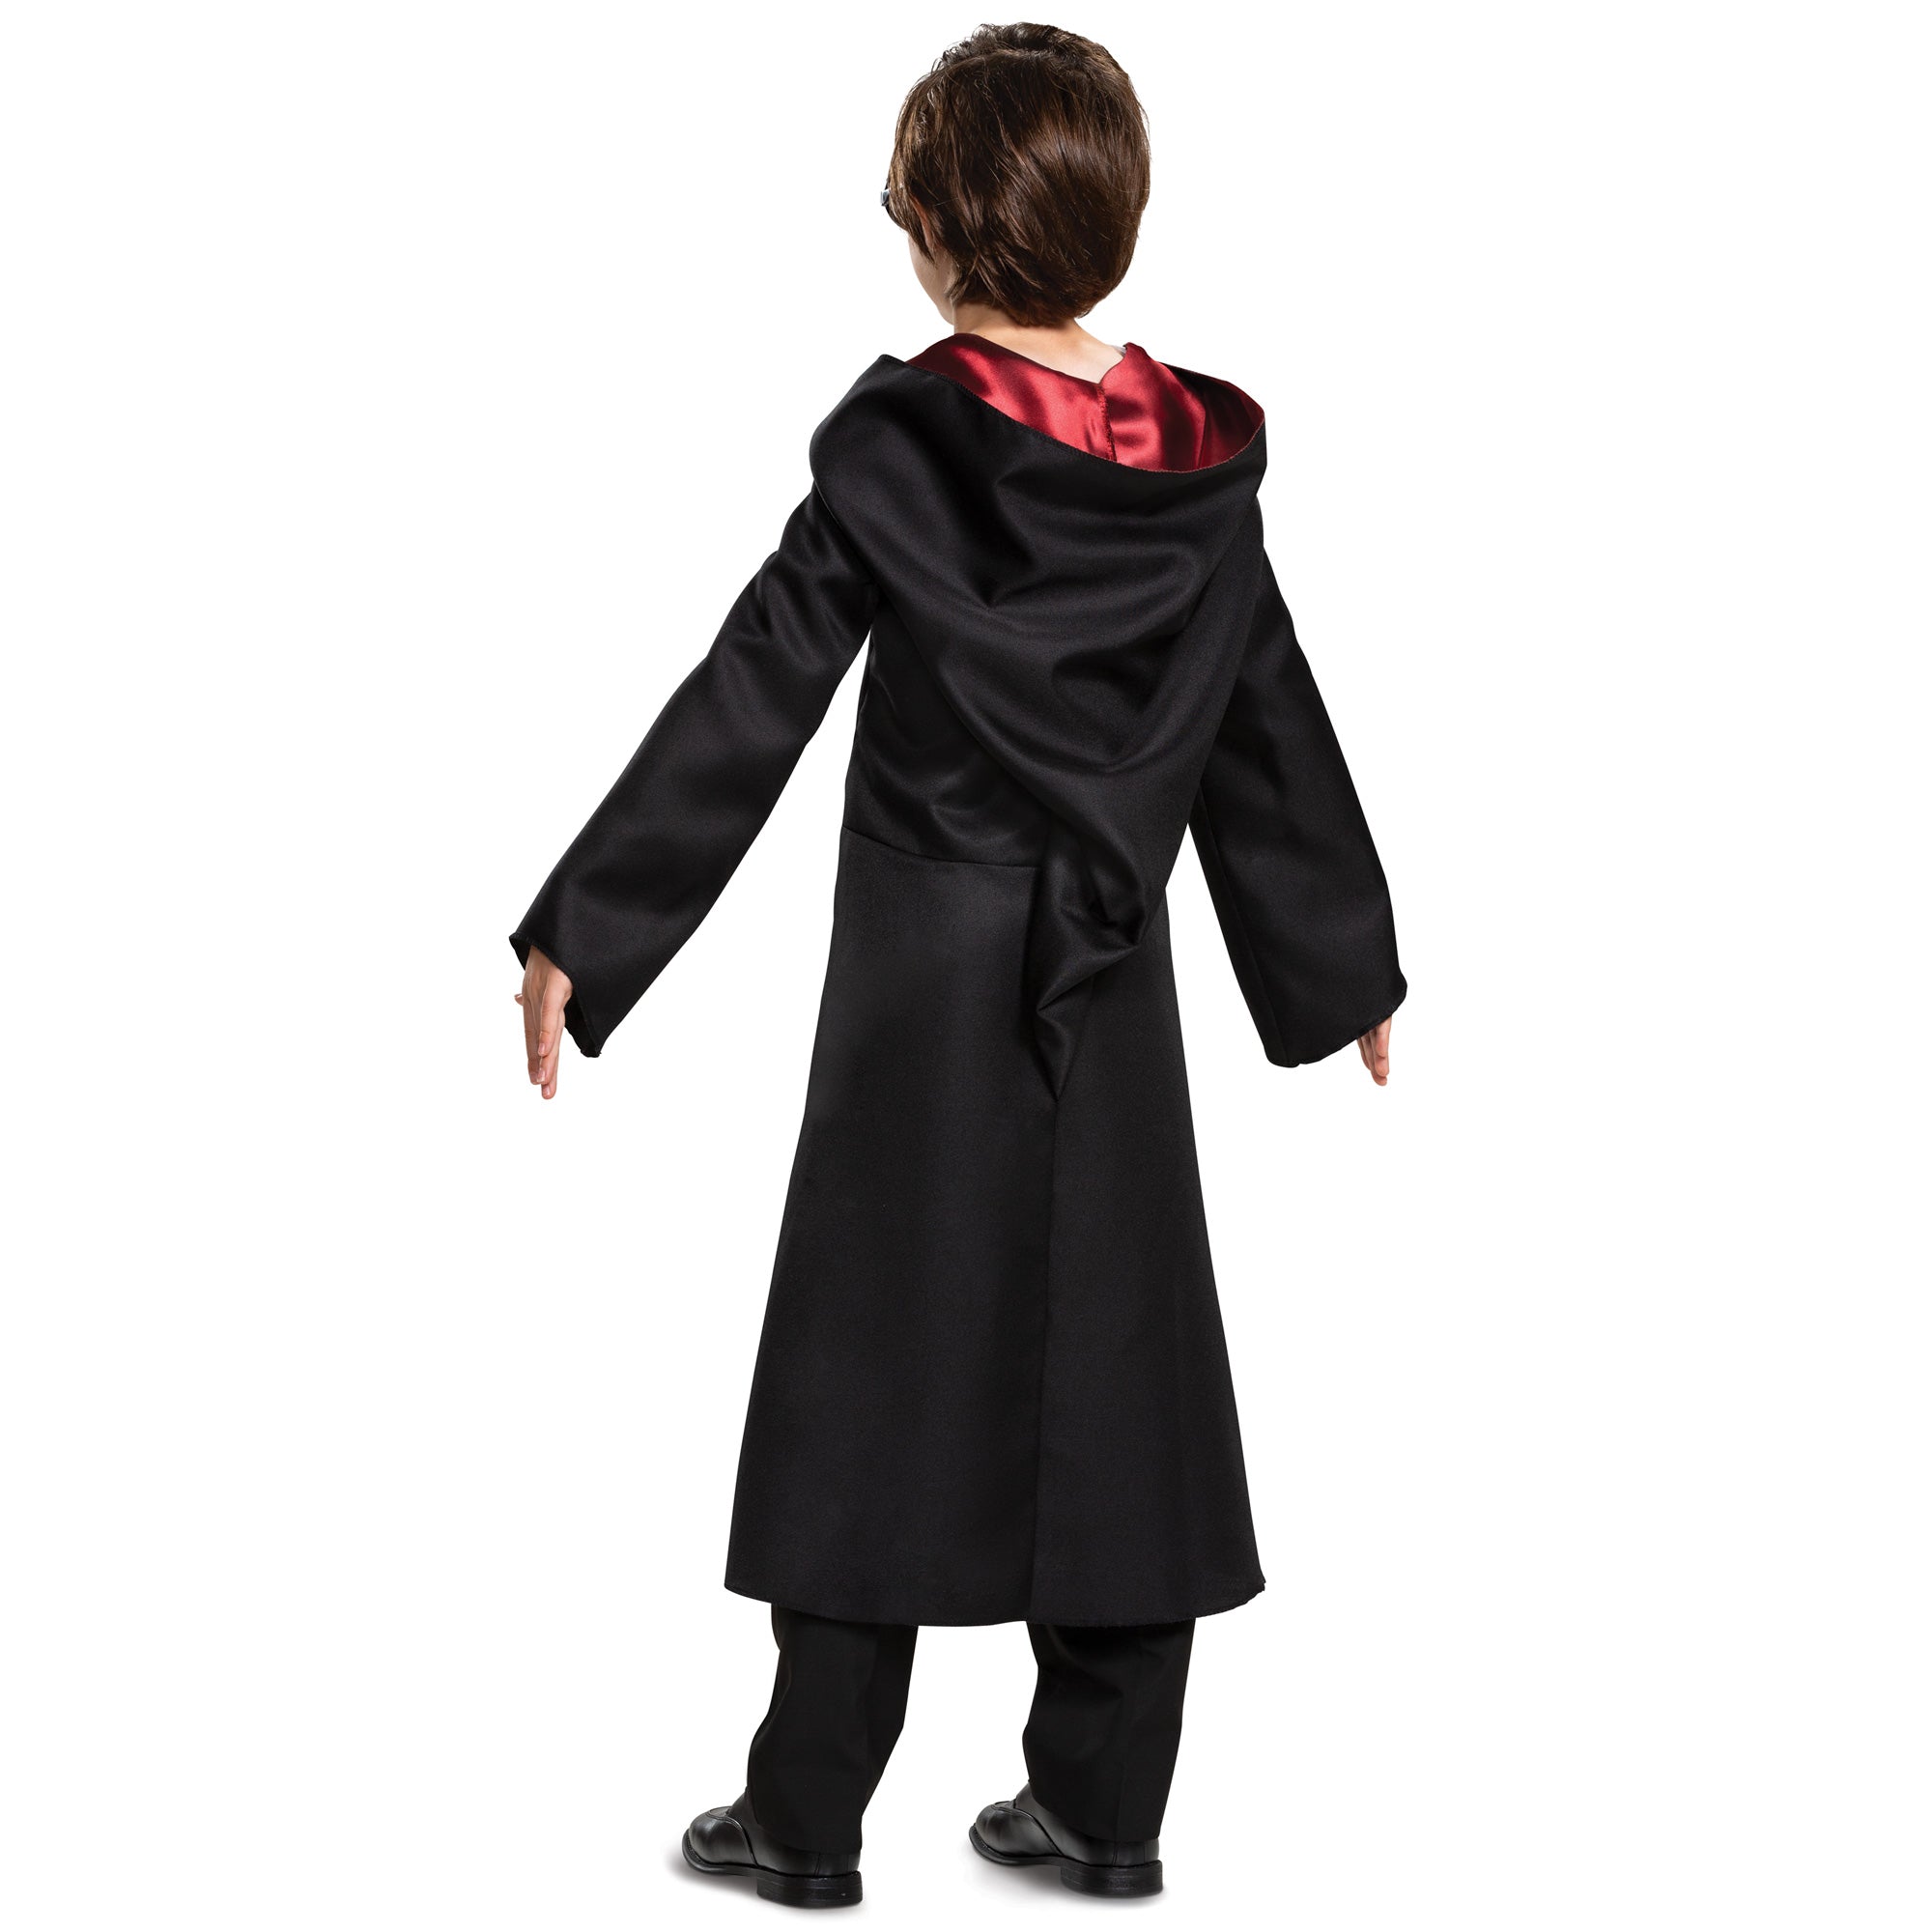 Harry Potter Cloak Costume & Accessories Set (For Kids & Adults